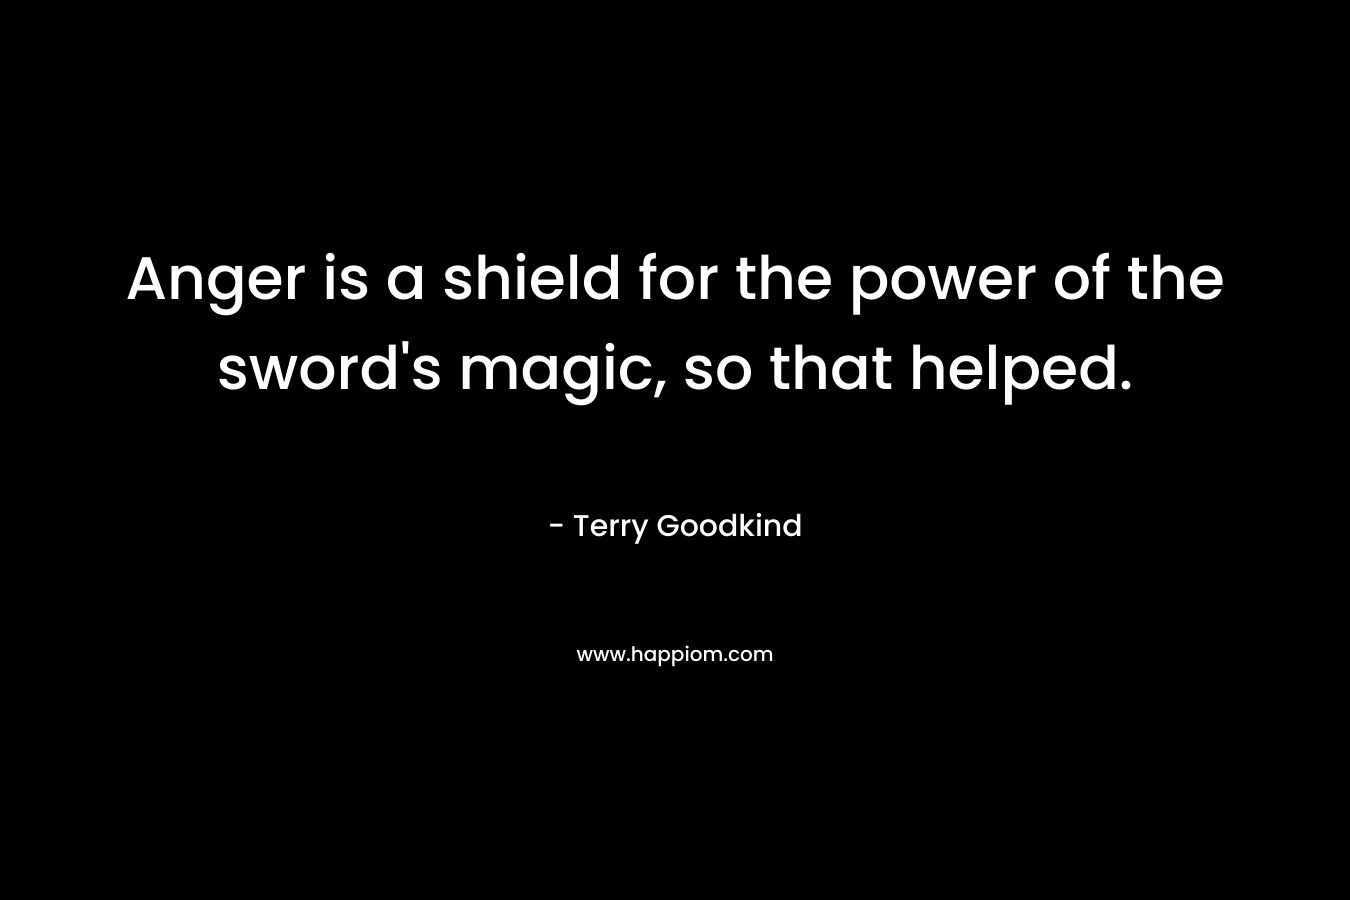 Anger is a shield for the power of the sword's magic, so that helped.